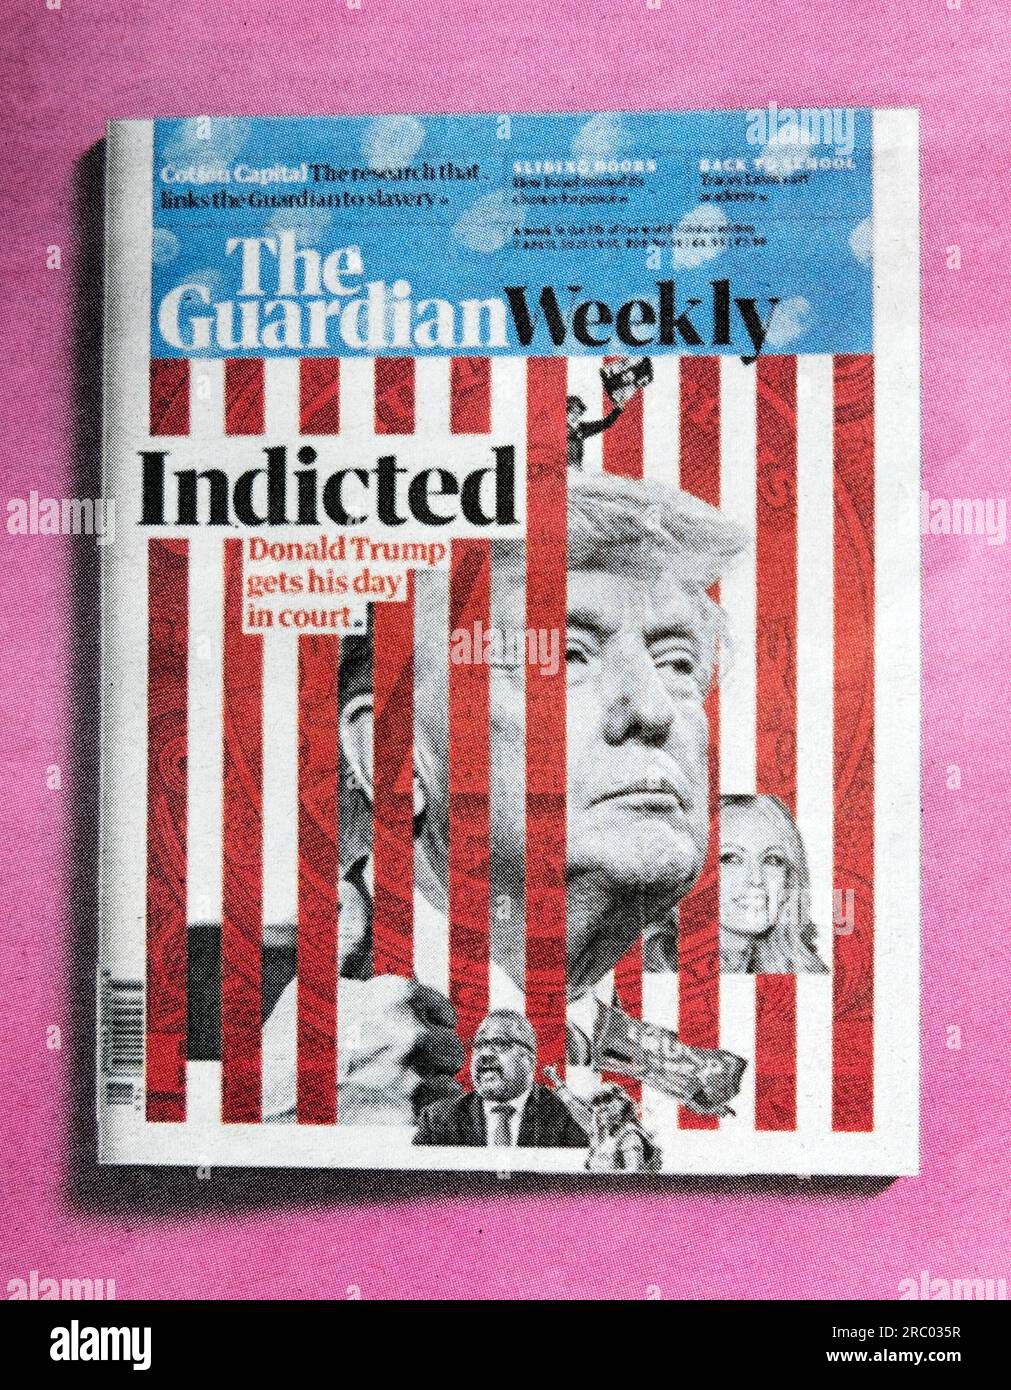 Former President Donald Trump 'Indicted' 'gets his day in court Guardian Weekly US politics front cover 7 April 2023 edition London England UK Stock Photo